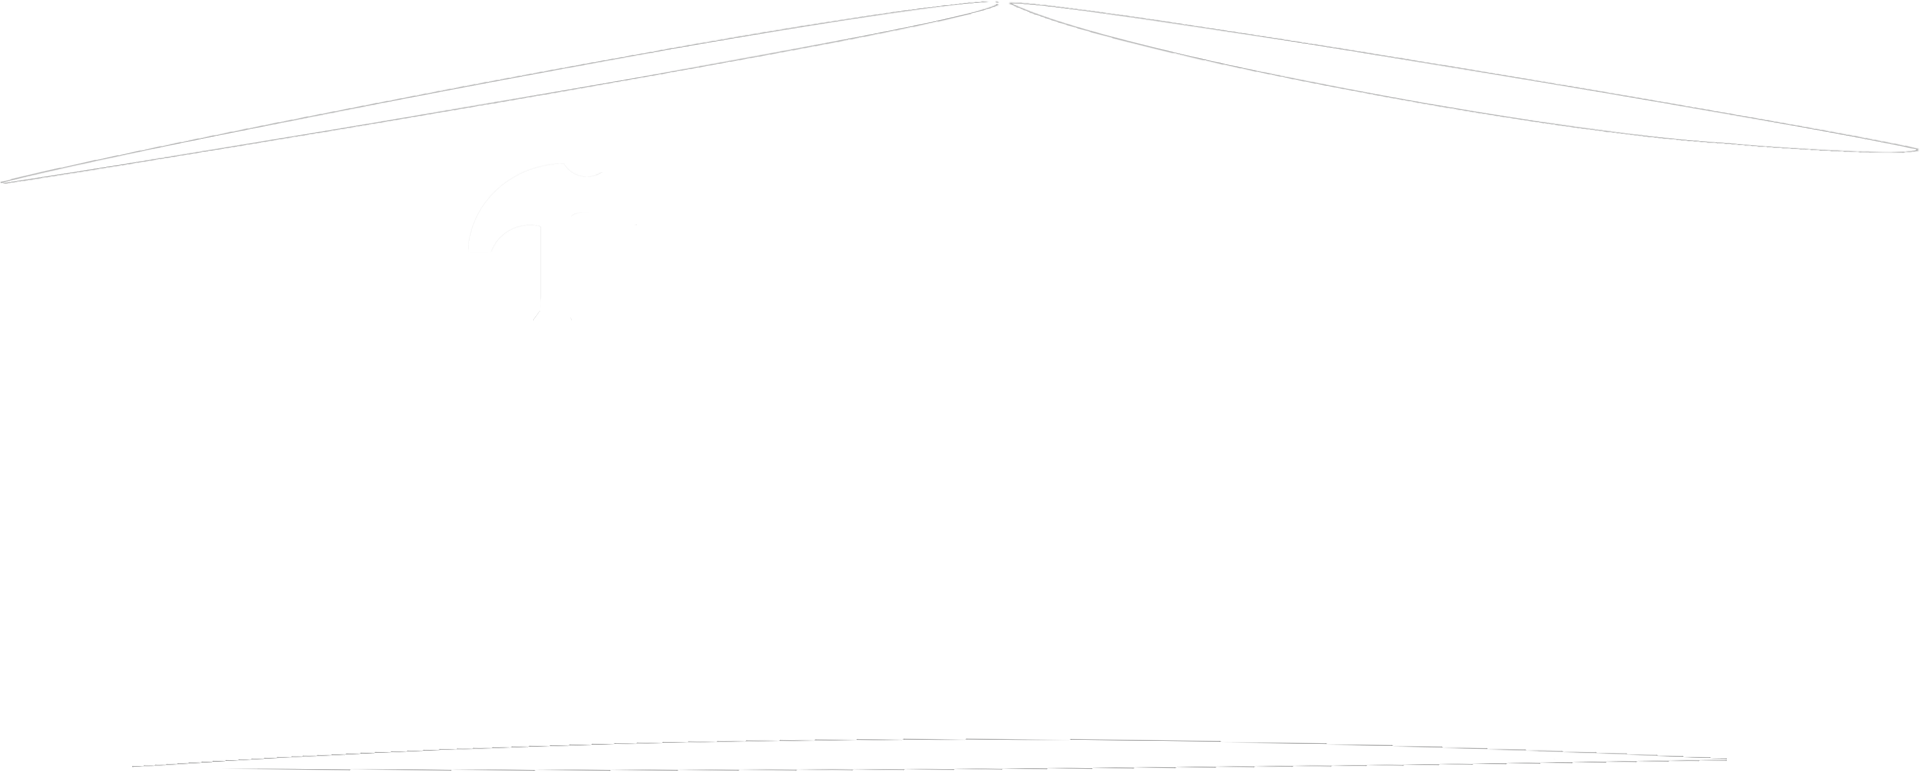 C.R. Young Construction